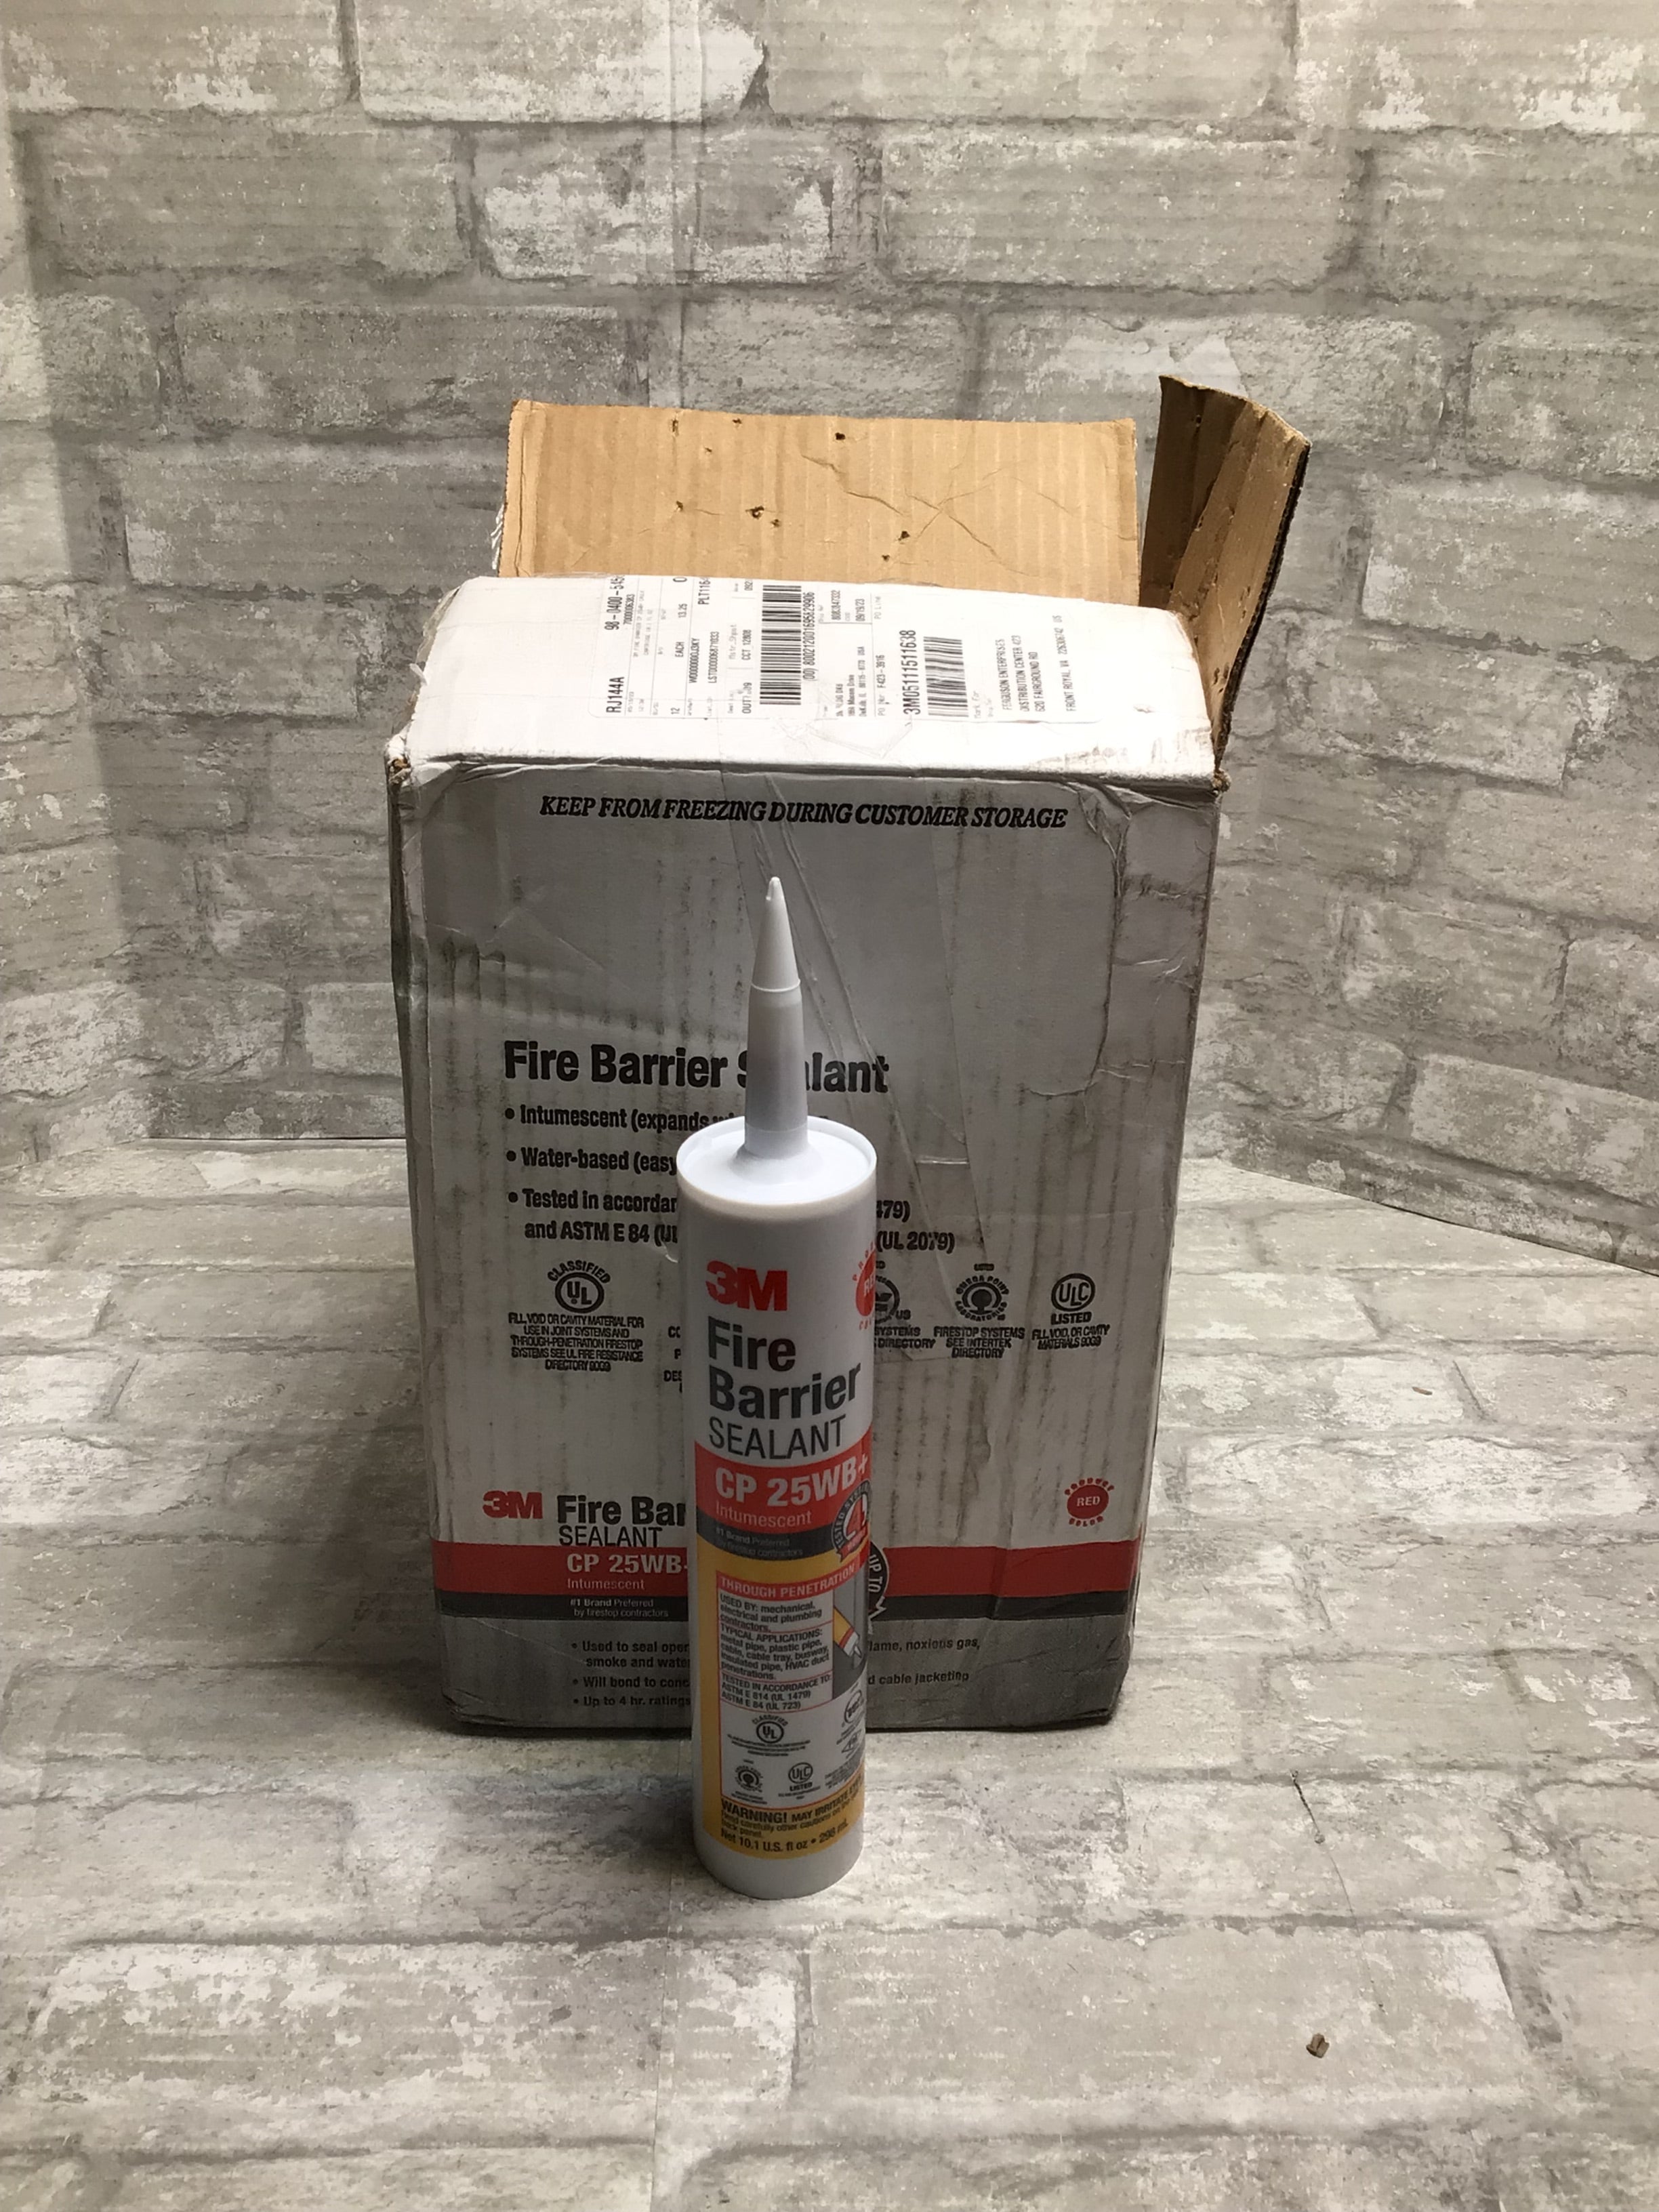 3M TALC FireBarrier Sealant CP25WB for Commercial, Industrial, Residential,12PK* (8214672376046)